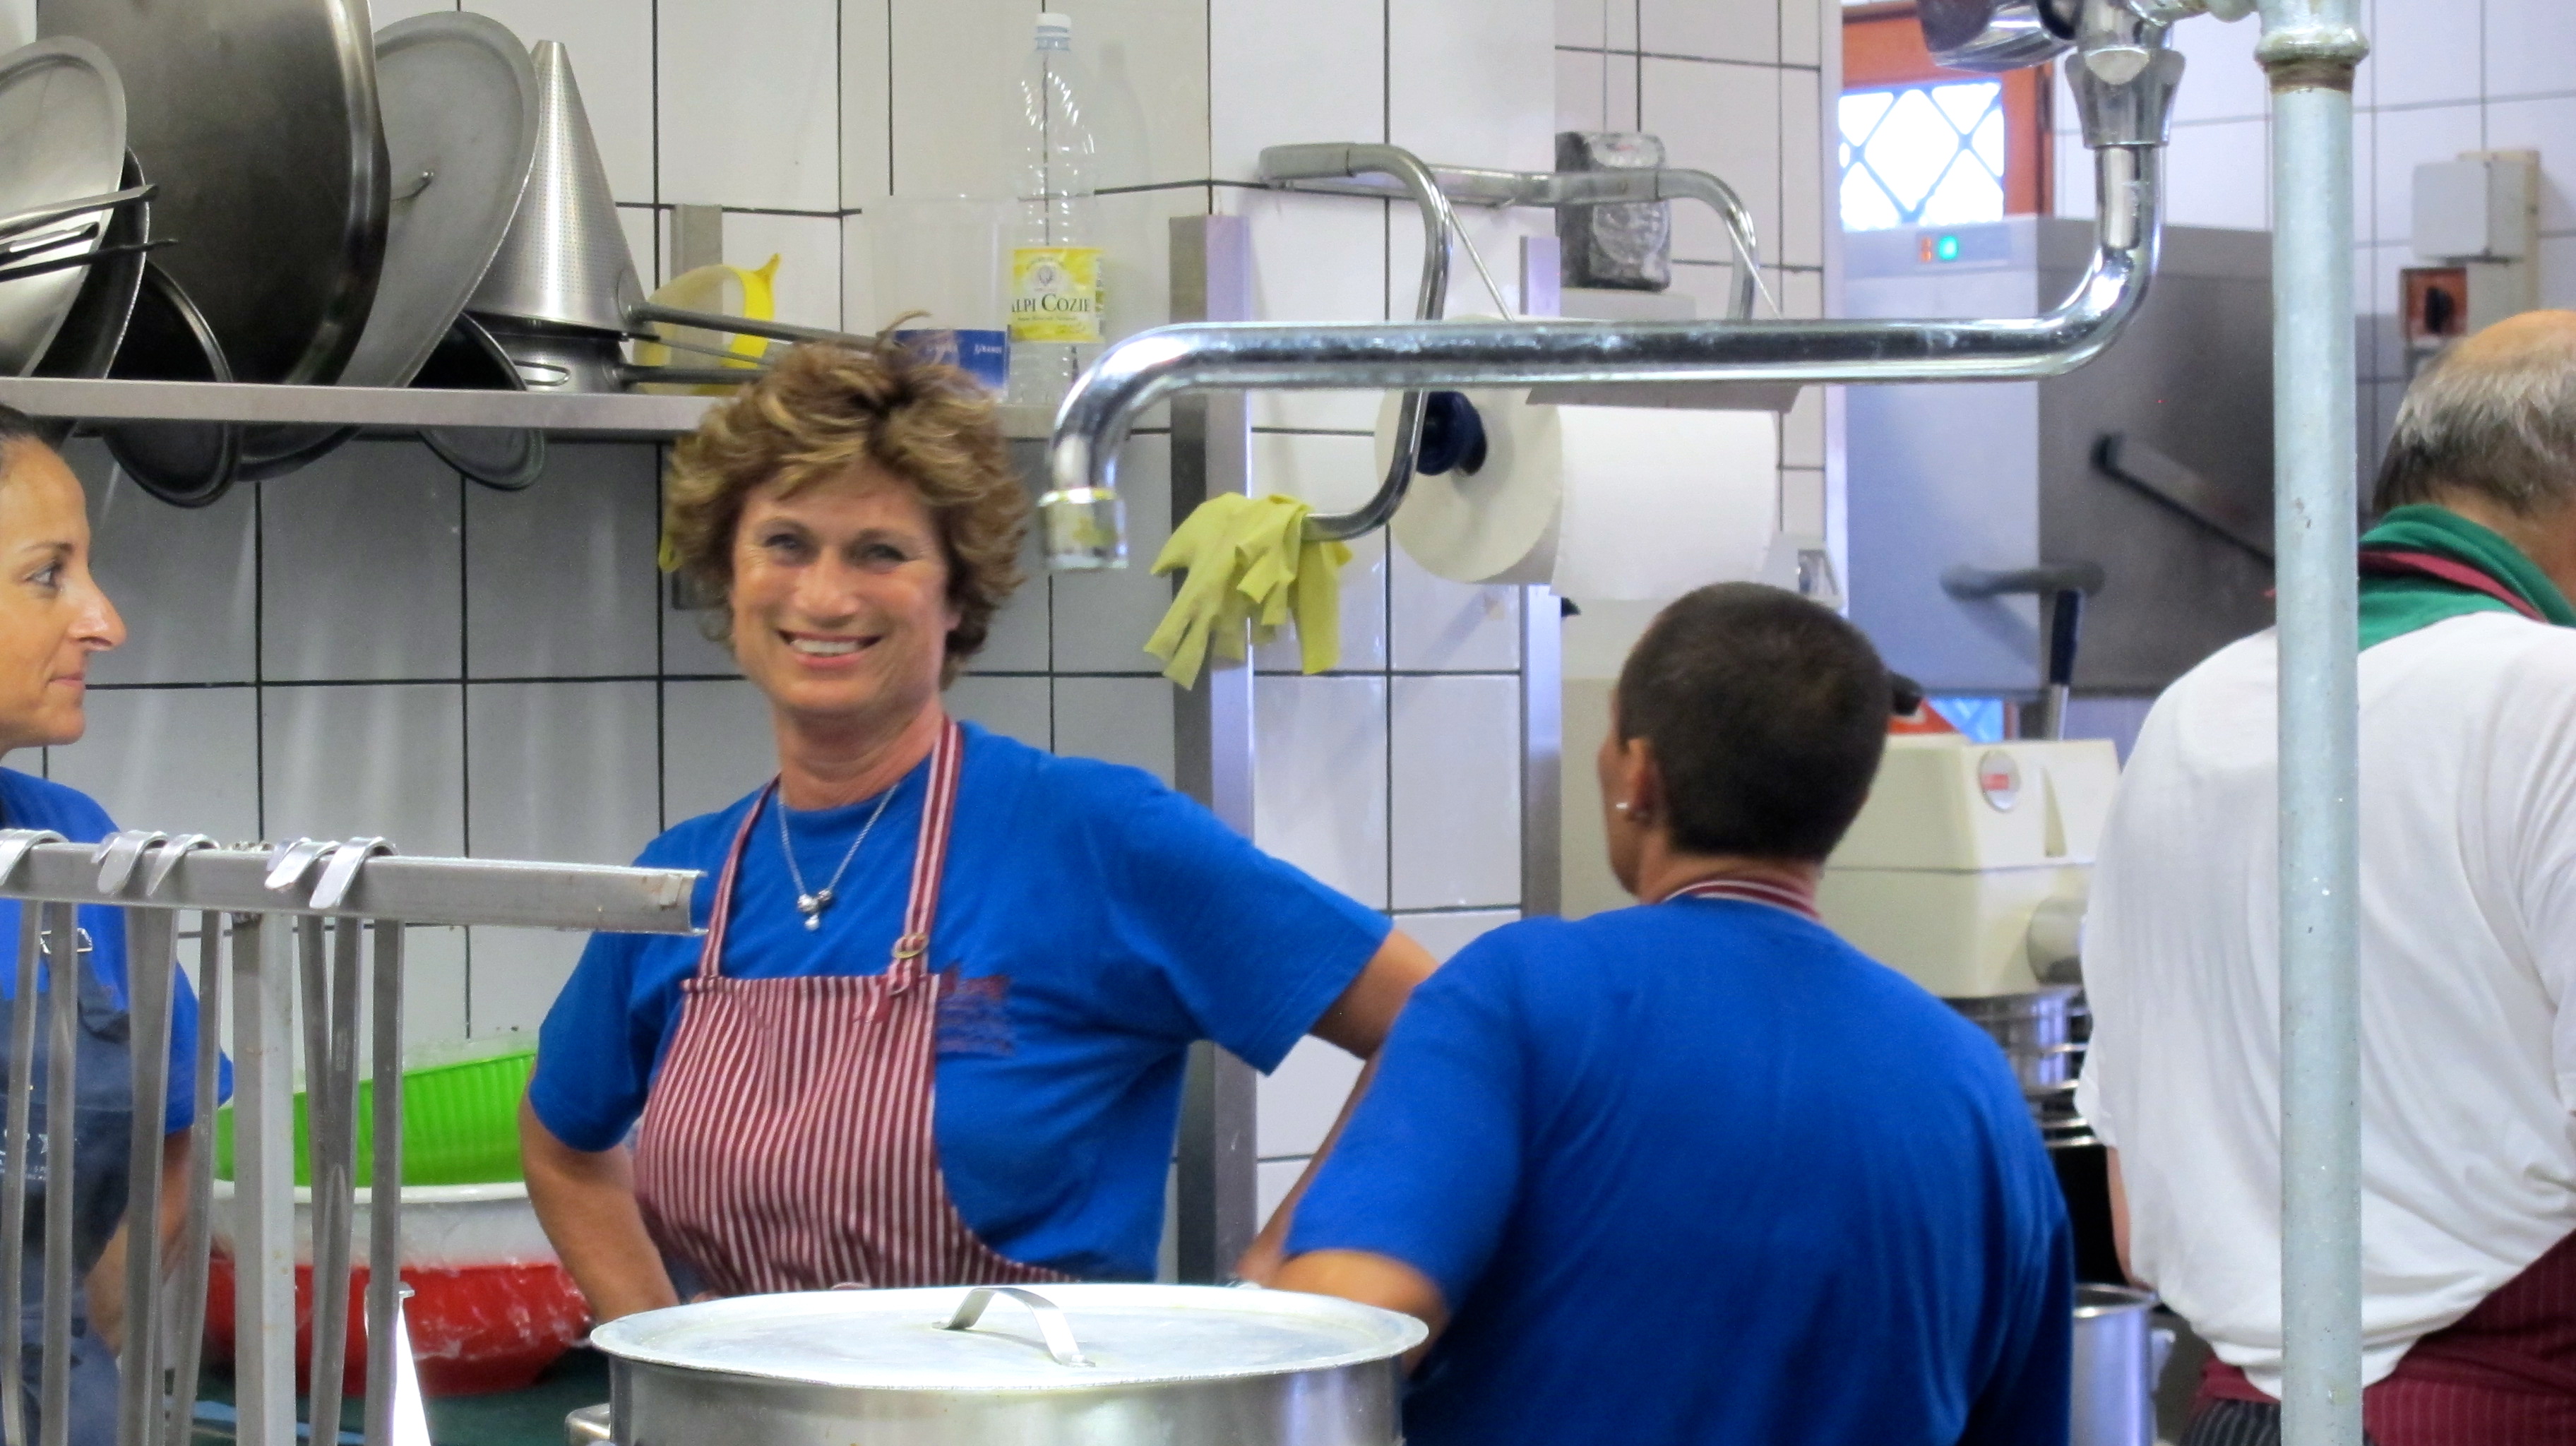 Marinella, who I washed dishes with the first few days, smiles at the camera. 